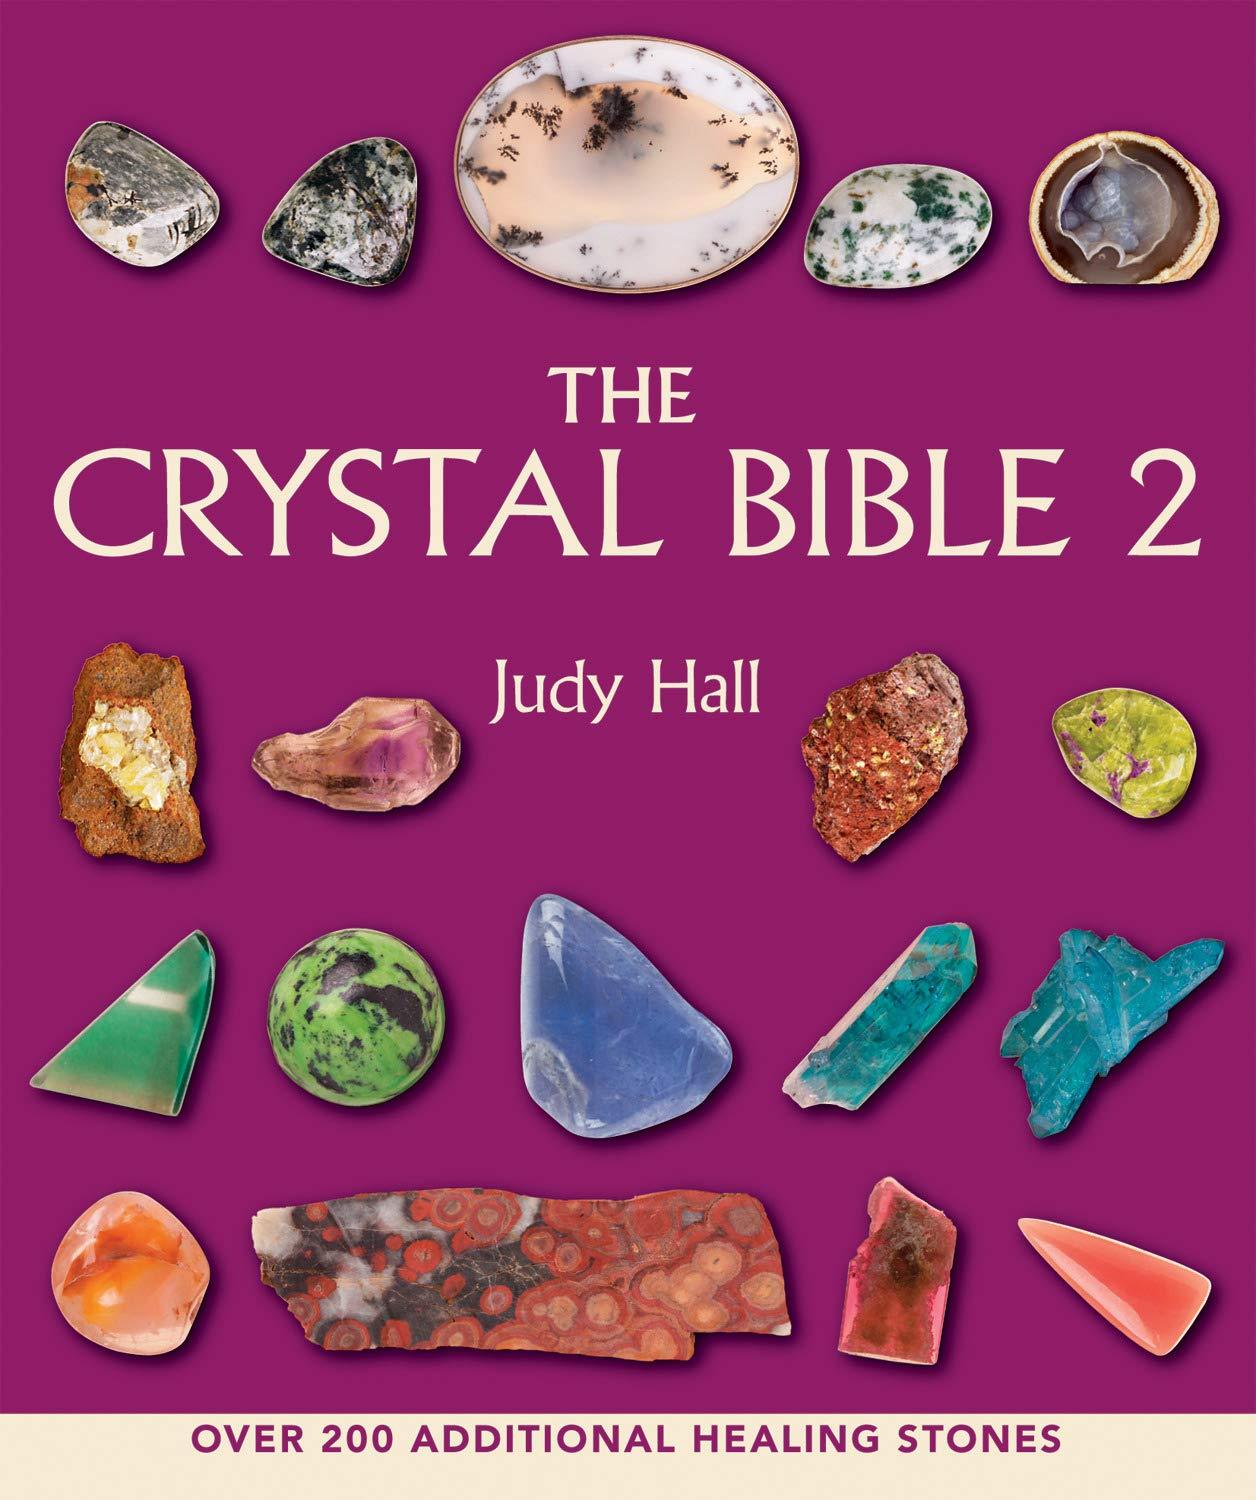 "The Crystal Bible 2" by Judy Hall